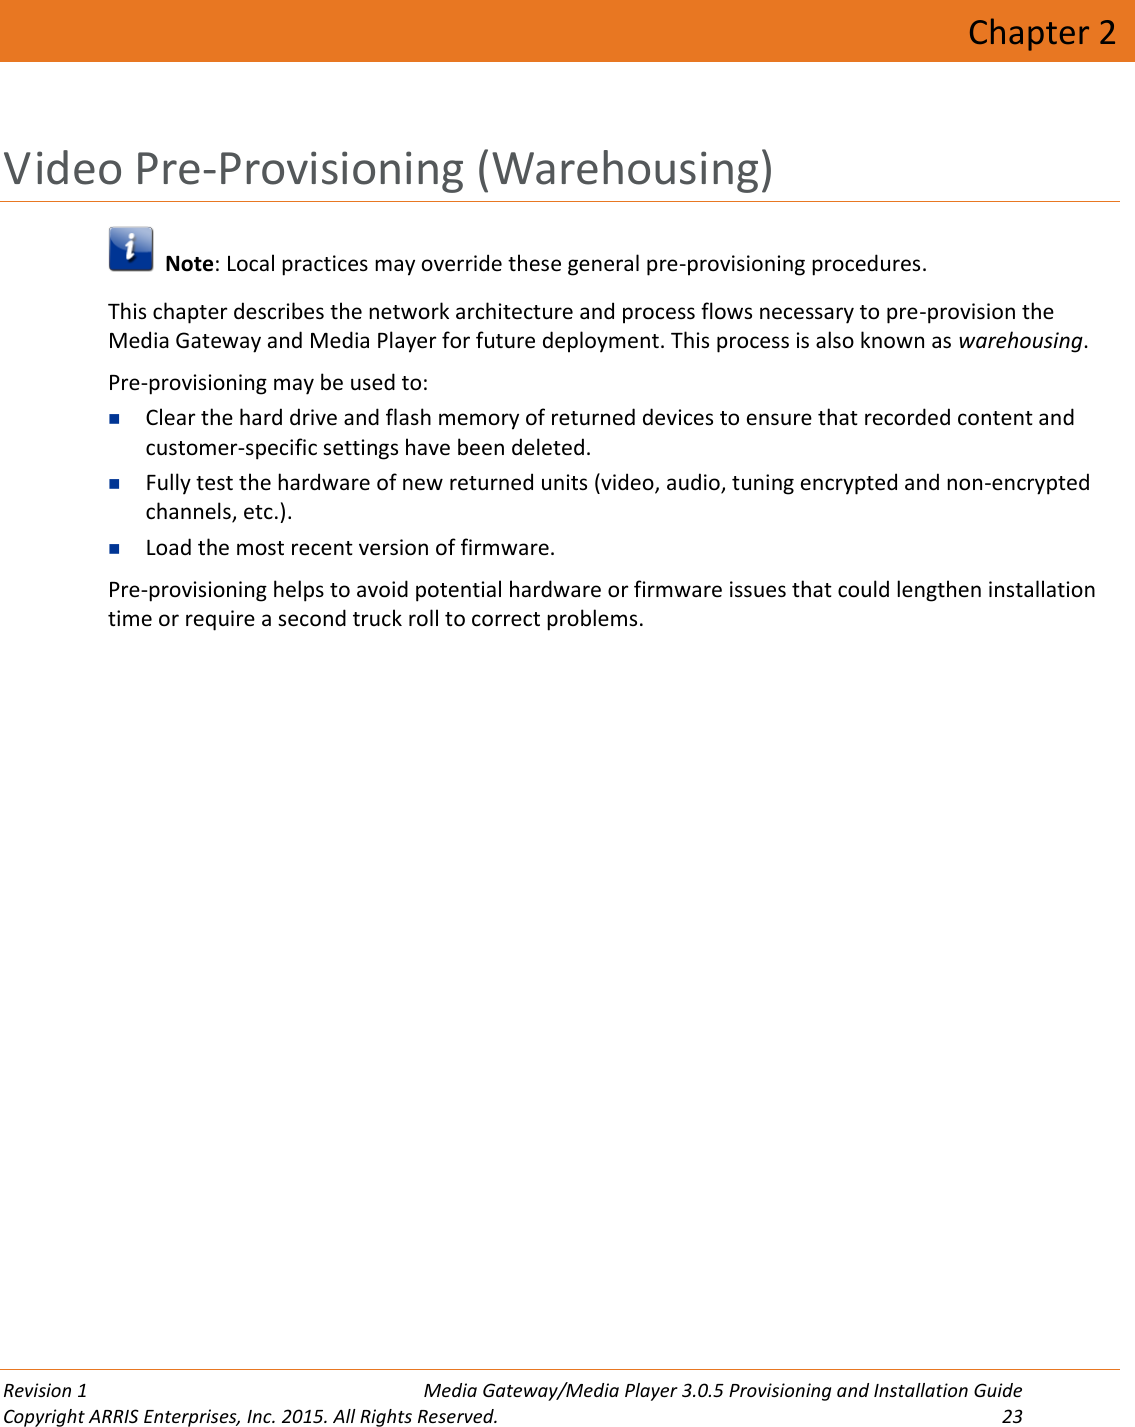  Revision 1  Media Gateway/Media Player 3.0.5 Provisioning and Installation Guide Copyright ARRIS Enterprises, Inc. 2015. All Rights Reserved.  23  Chapter 2 Video Pre-Provisioning (Warehousing)   Note: Local practices may override these general pre-provisioning procedures. This chapter describes the network architecture and process flows necessary to pre-provision the Media Gateway and Media Player for future deployment. This process is also known as warehousing. Pre-provisioning may be used to:  Clear the hard drive and flash memory of returned devices to ensure that recorded content and customer-specific settings have been deleted.  Fully test the hardware of new returned units (video, audio, tuning encrypted and non-encrypted channels, etc.).  Load the most recent version of firmware. Pre-provisioning helps to avoid potential hardware or firmware issues that could lengthen installation time or require a second truck roll to correct problems.   